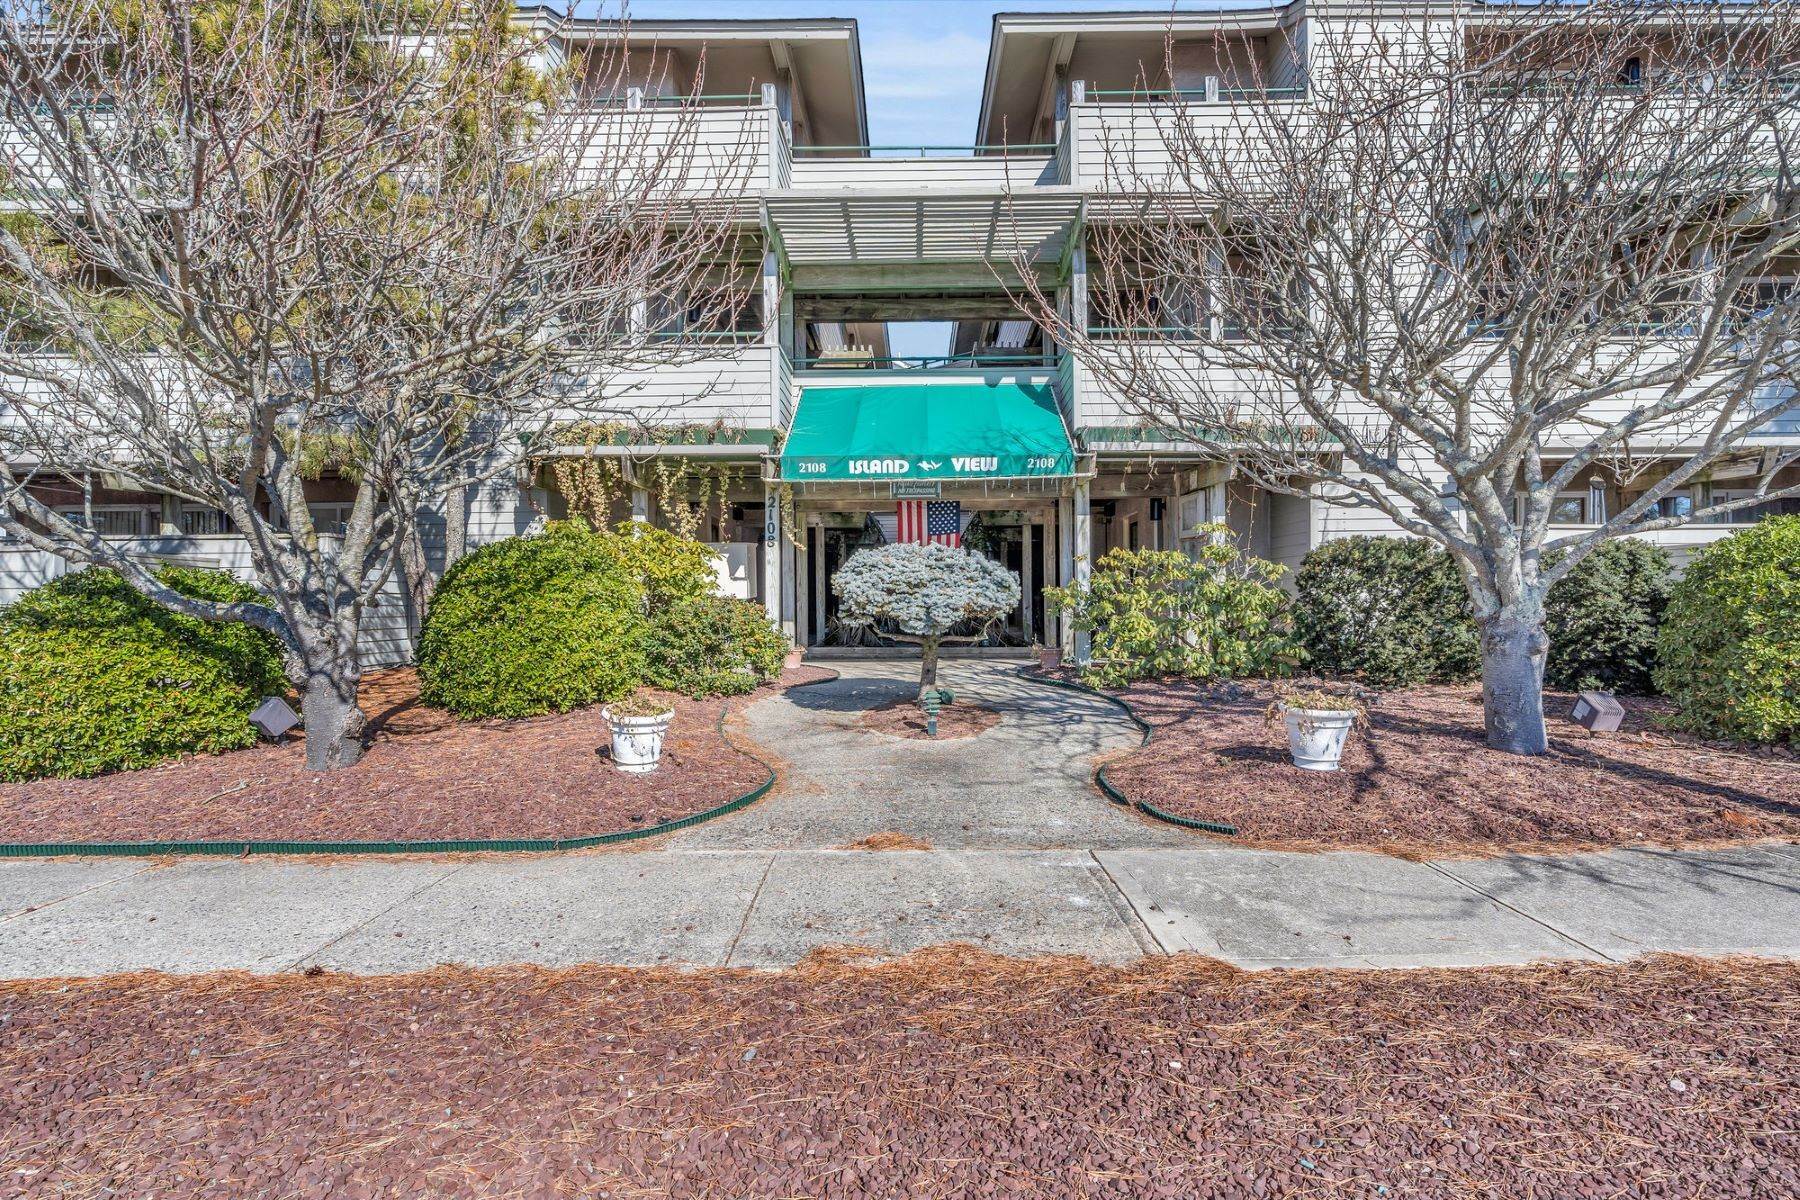 Condominiums for Sale at One Block to Beach 2108 Central Avenue 5, Seaside Park, New Jersey 08752 United States